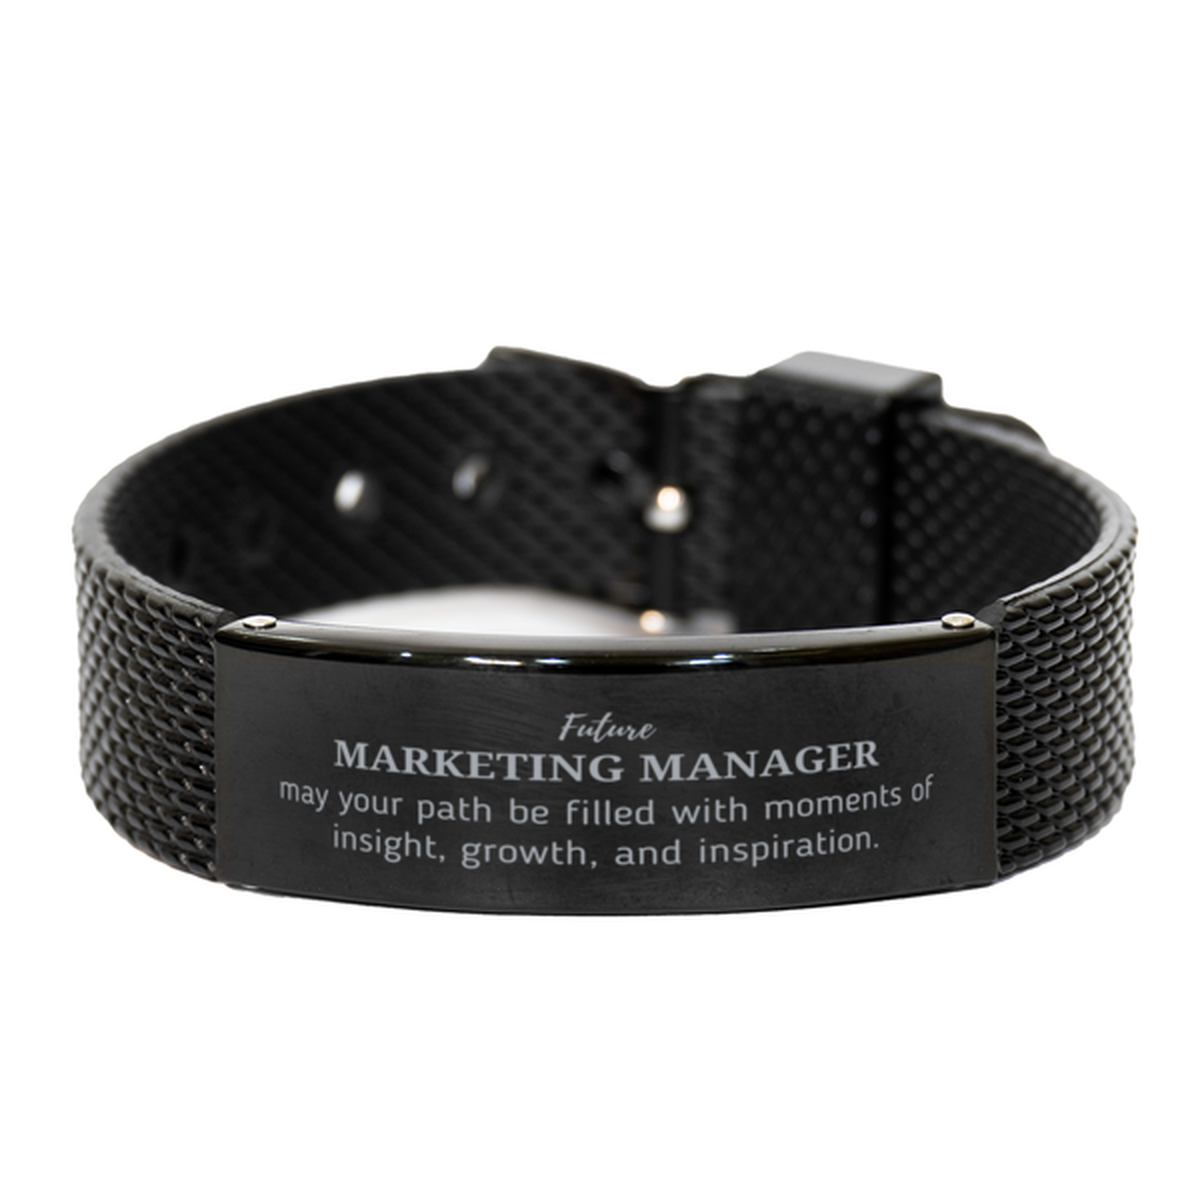 Future Marketing Manager Gifts, May your path be filled with moments of insight, Graduation Gifts for New Marketing Manager, Christmas Unique Black Shark Mesh Bracelet For Men, Women, Friends